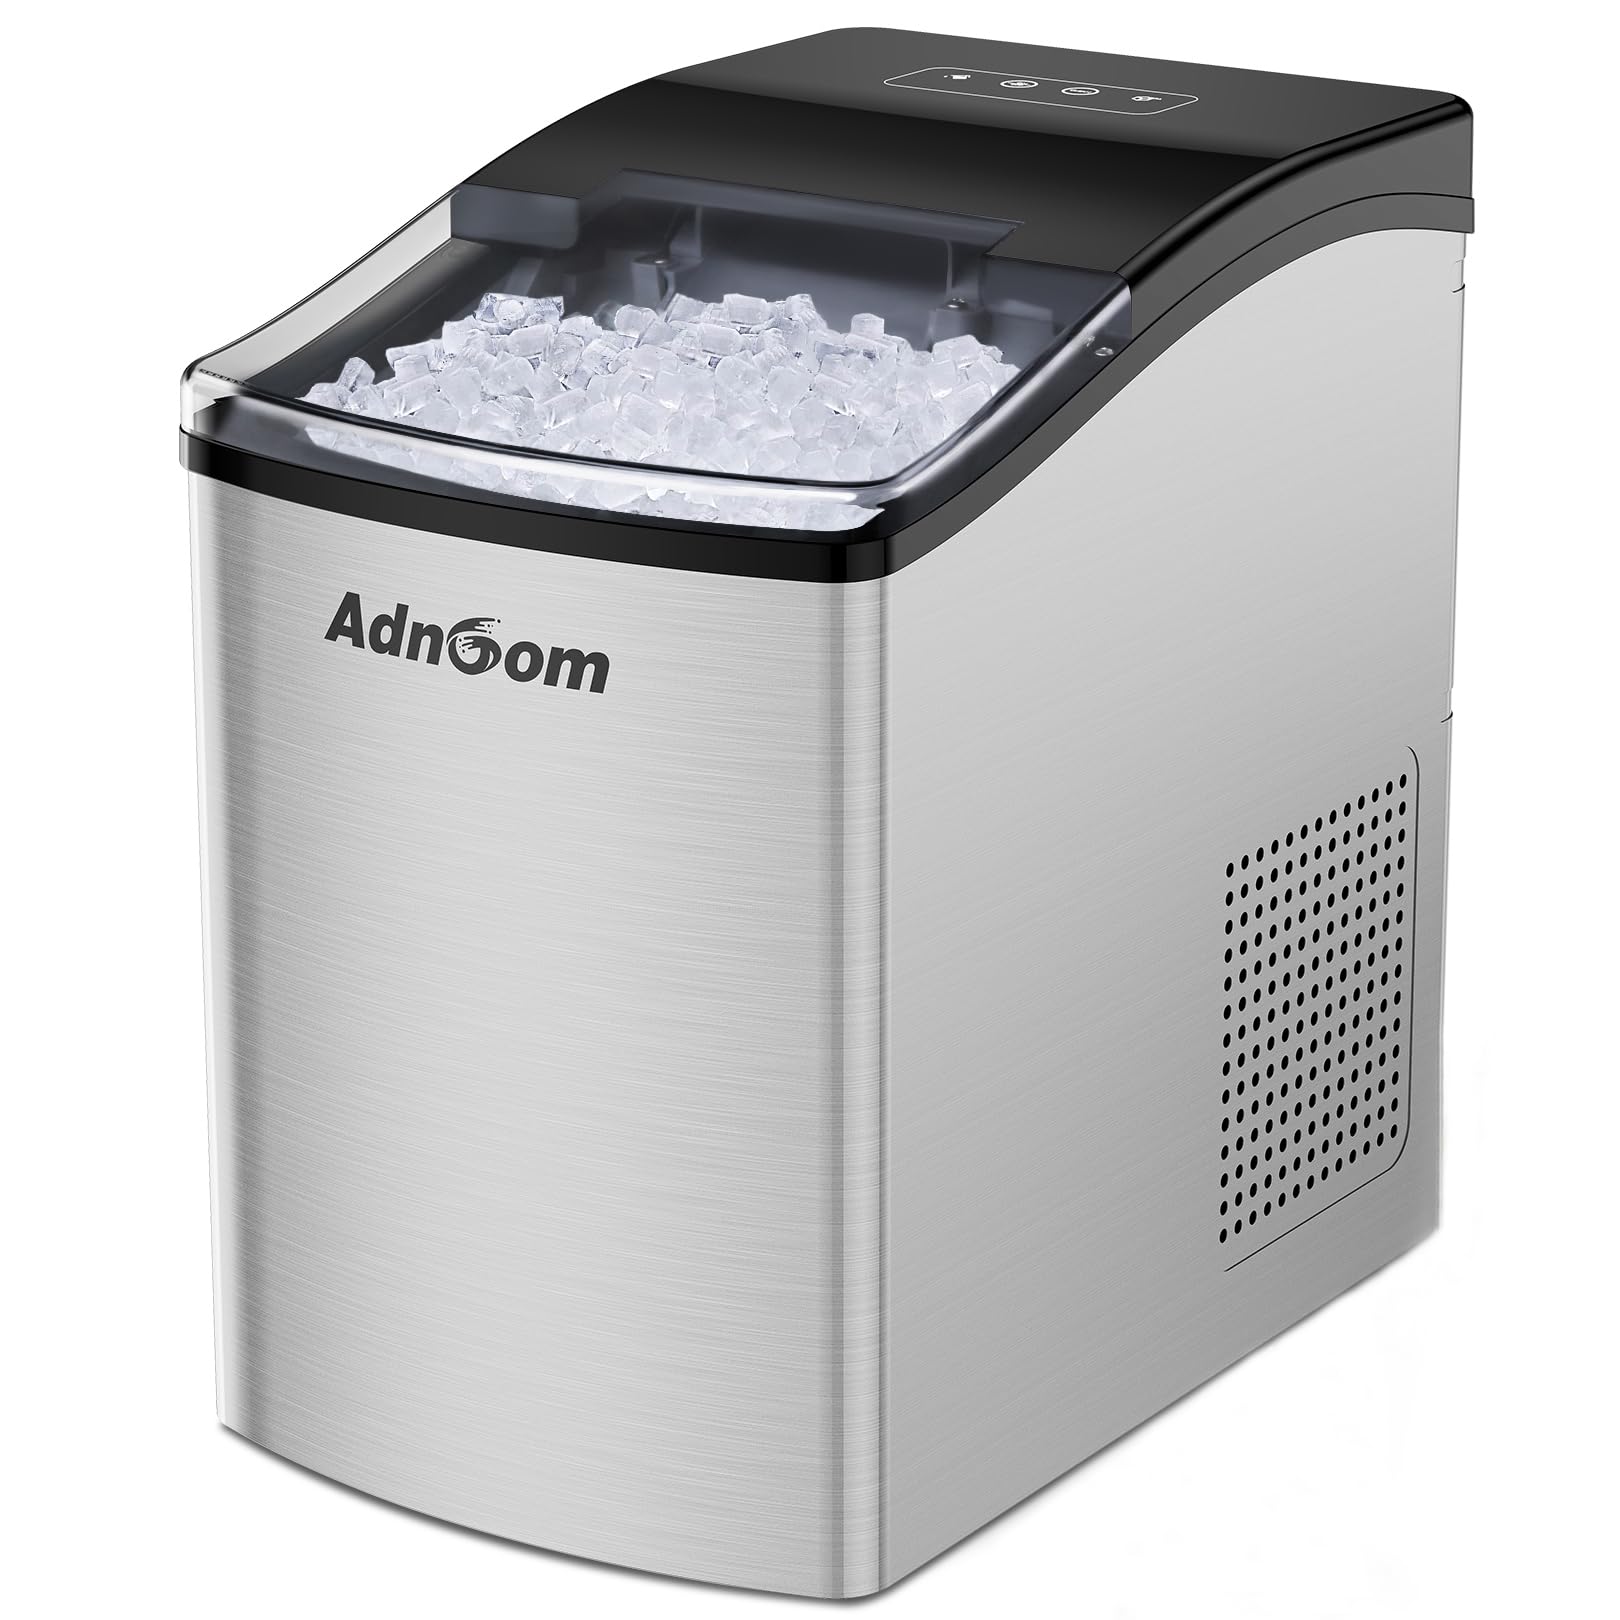 ADNOOM Countertop Ice Maker, Self-Cleaning Ice Machine with Ice Scoop and Basket, Chewable Ice Ready in 10 Mins, 38 Lbs in 24 Hours, Portable Nugget Ice Maker Machine for Home/Office/Bar/Rv/Party